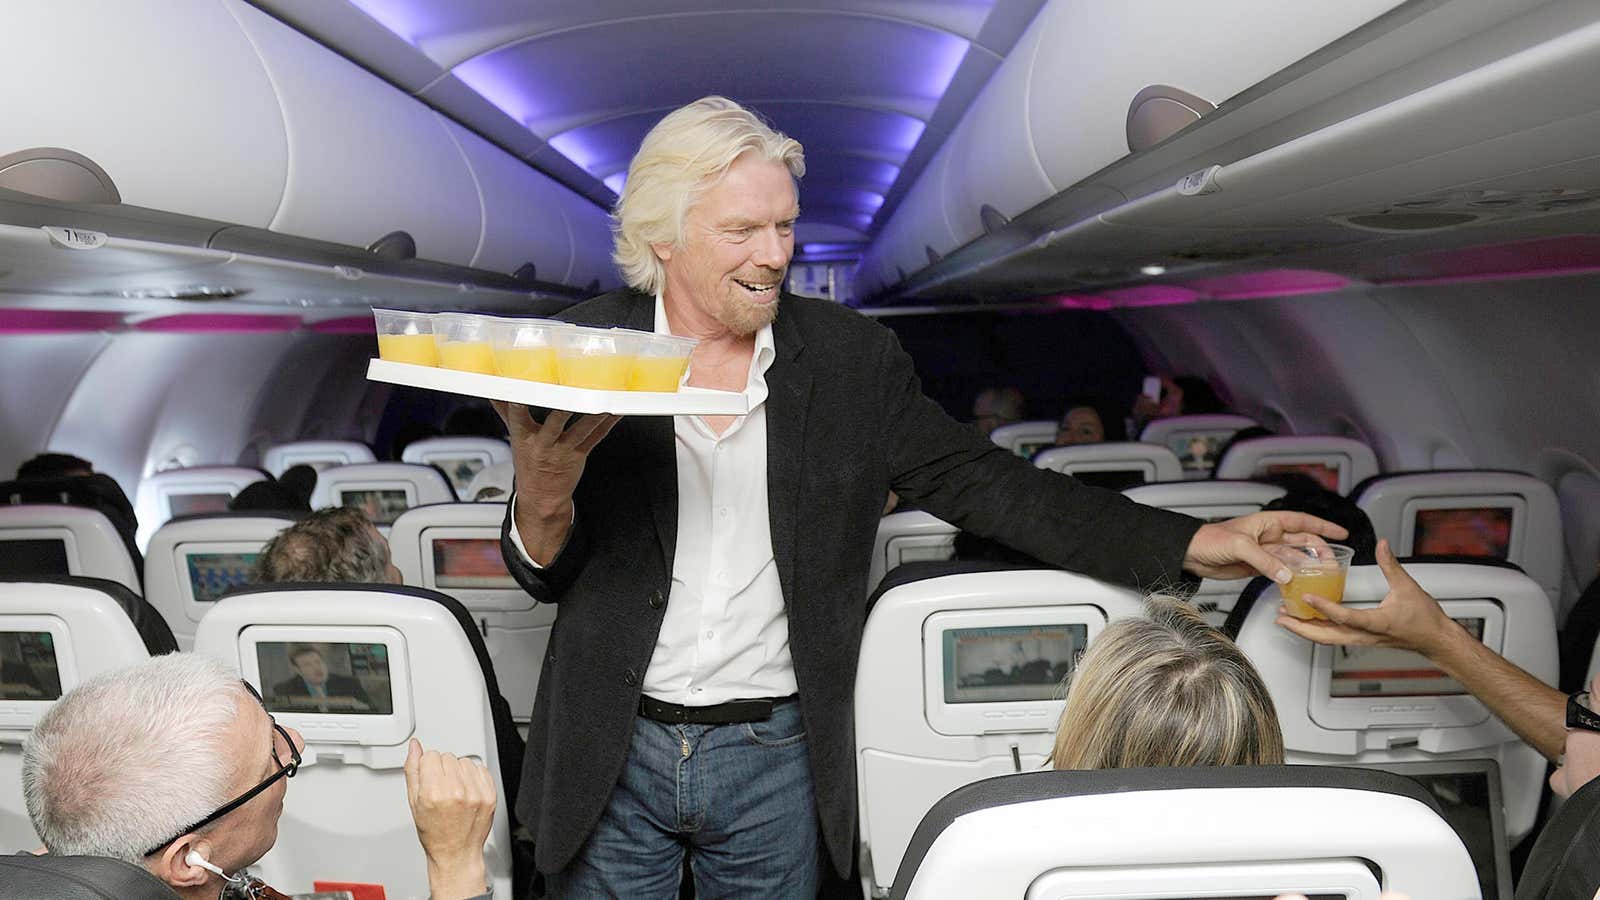 Personal service for Virgin’s high flyers.